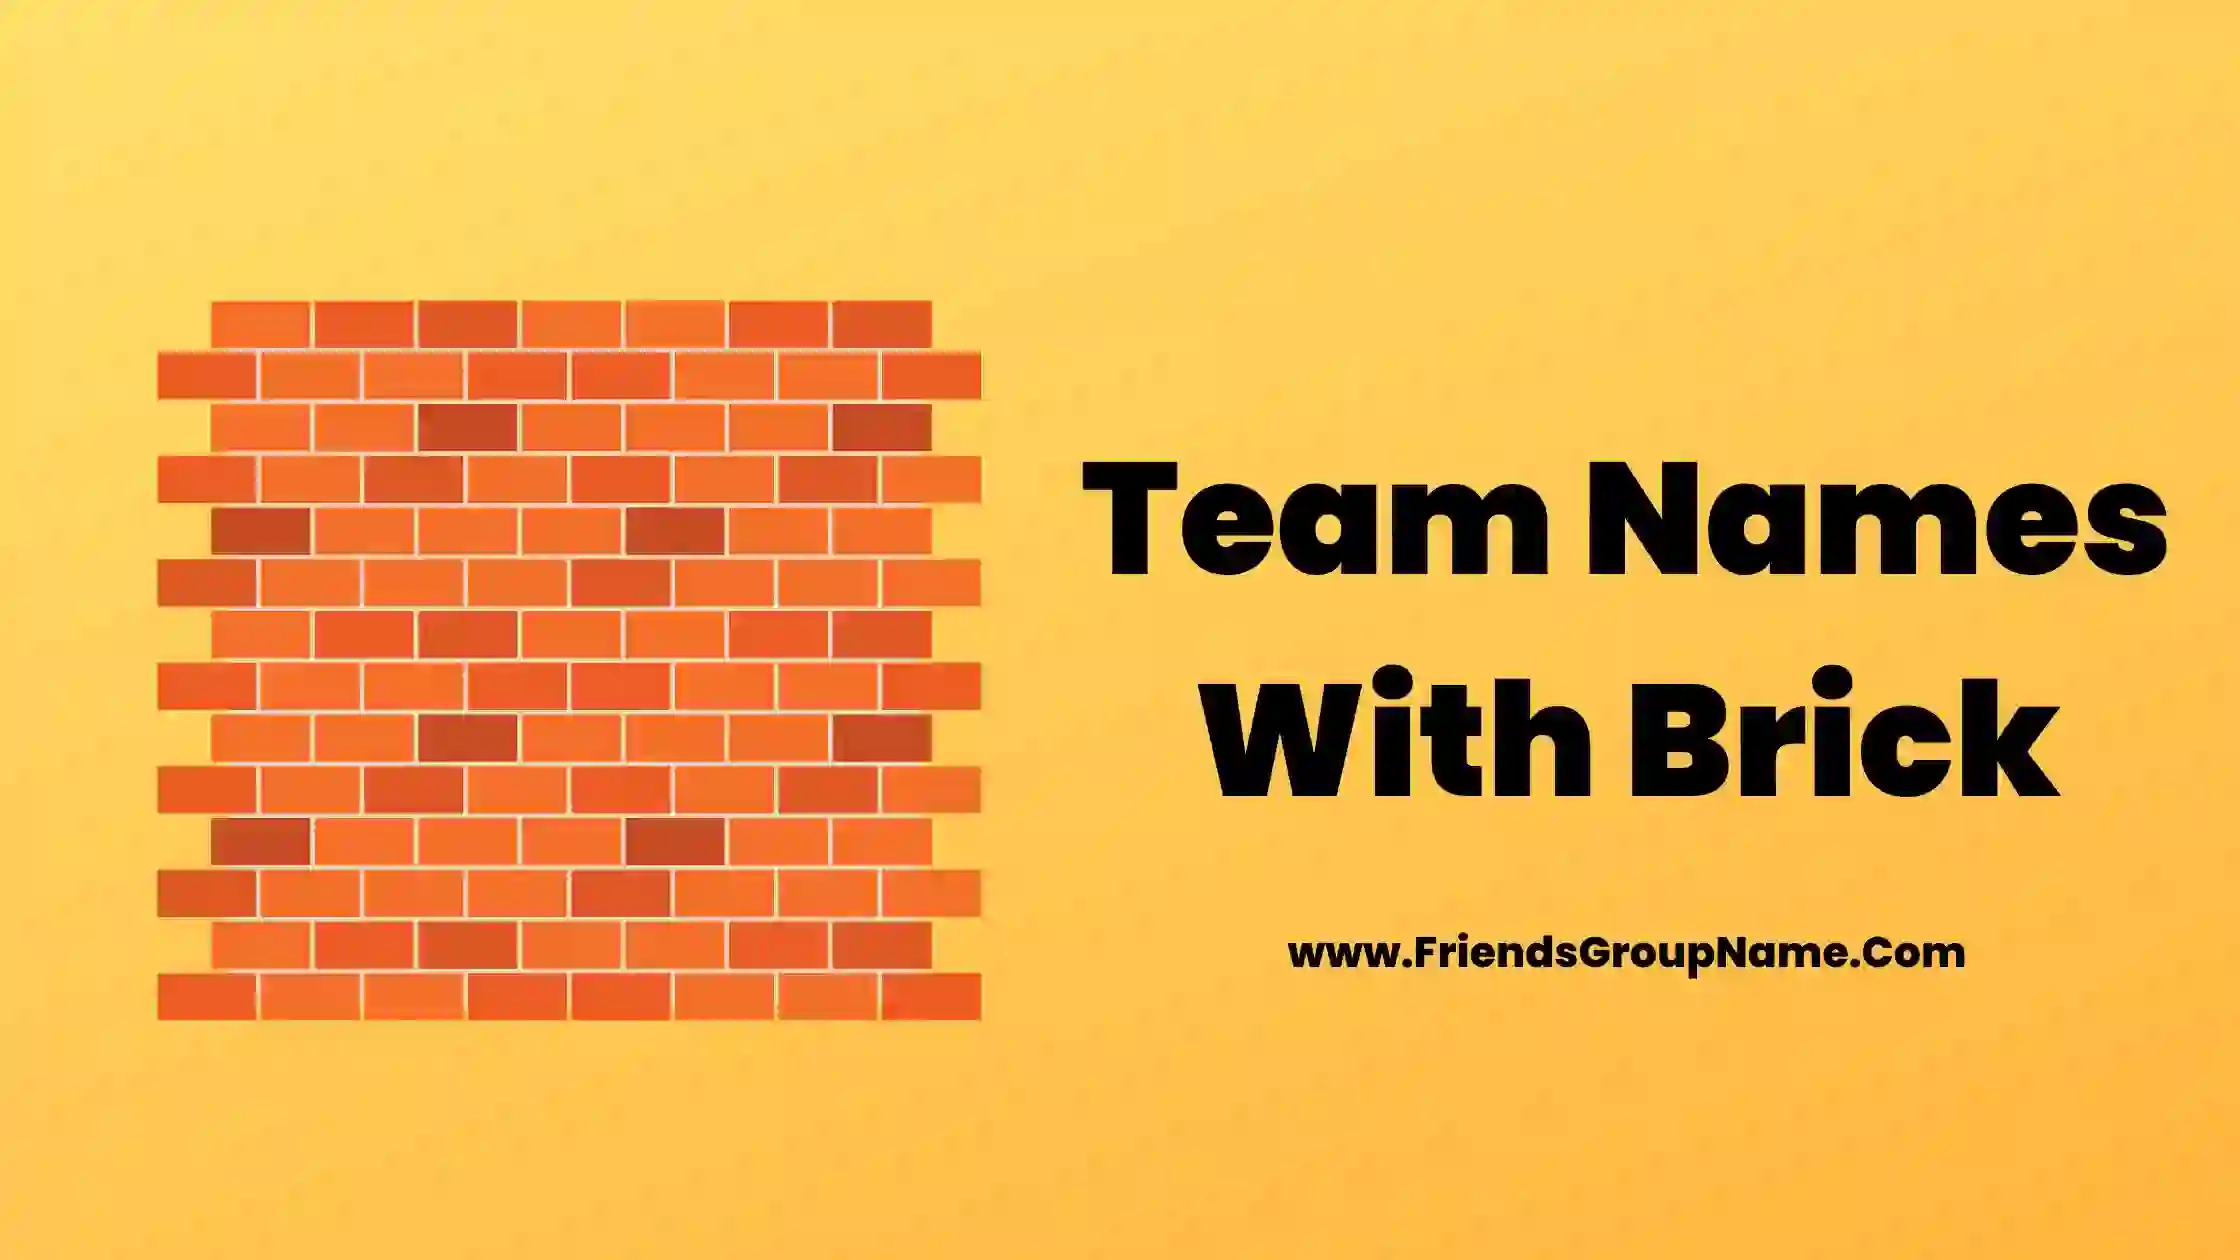 Team Names With Brick